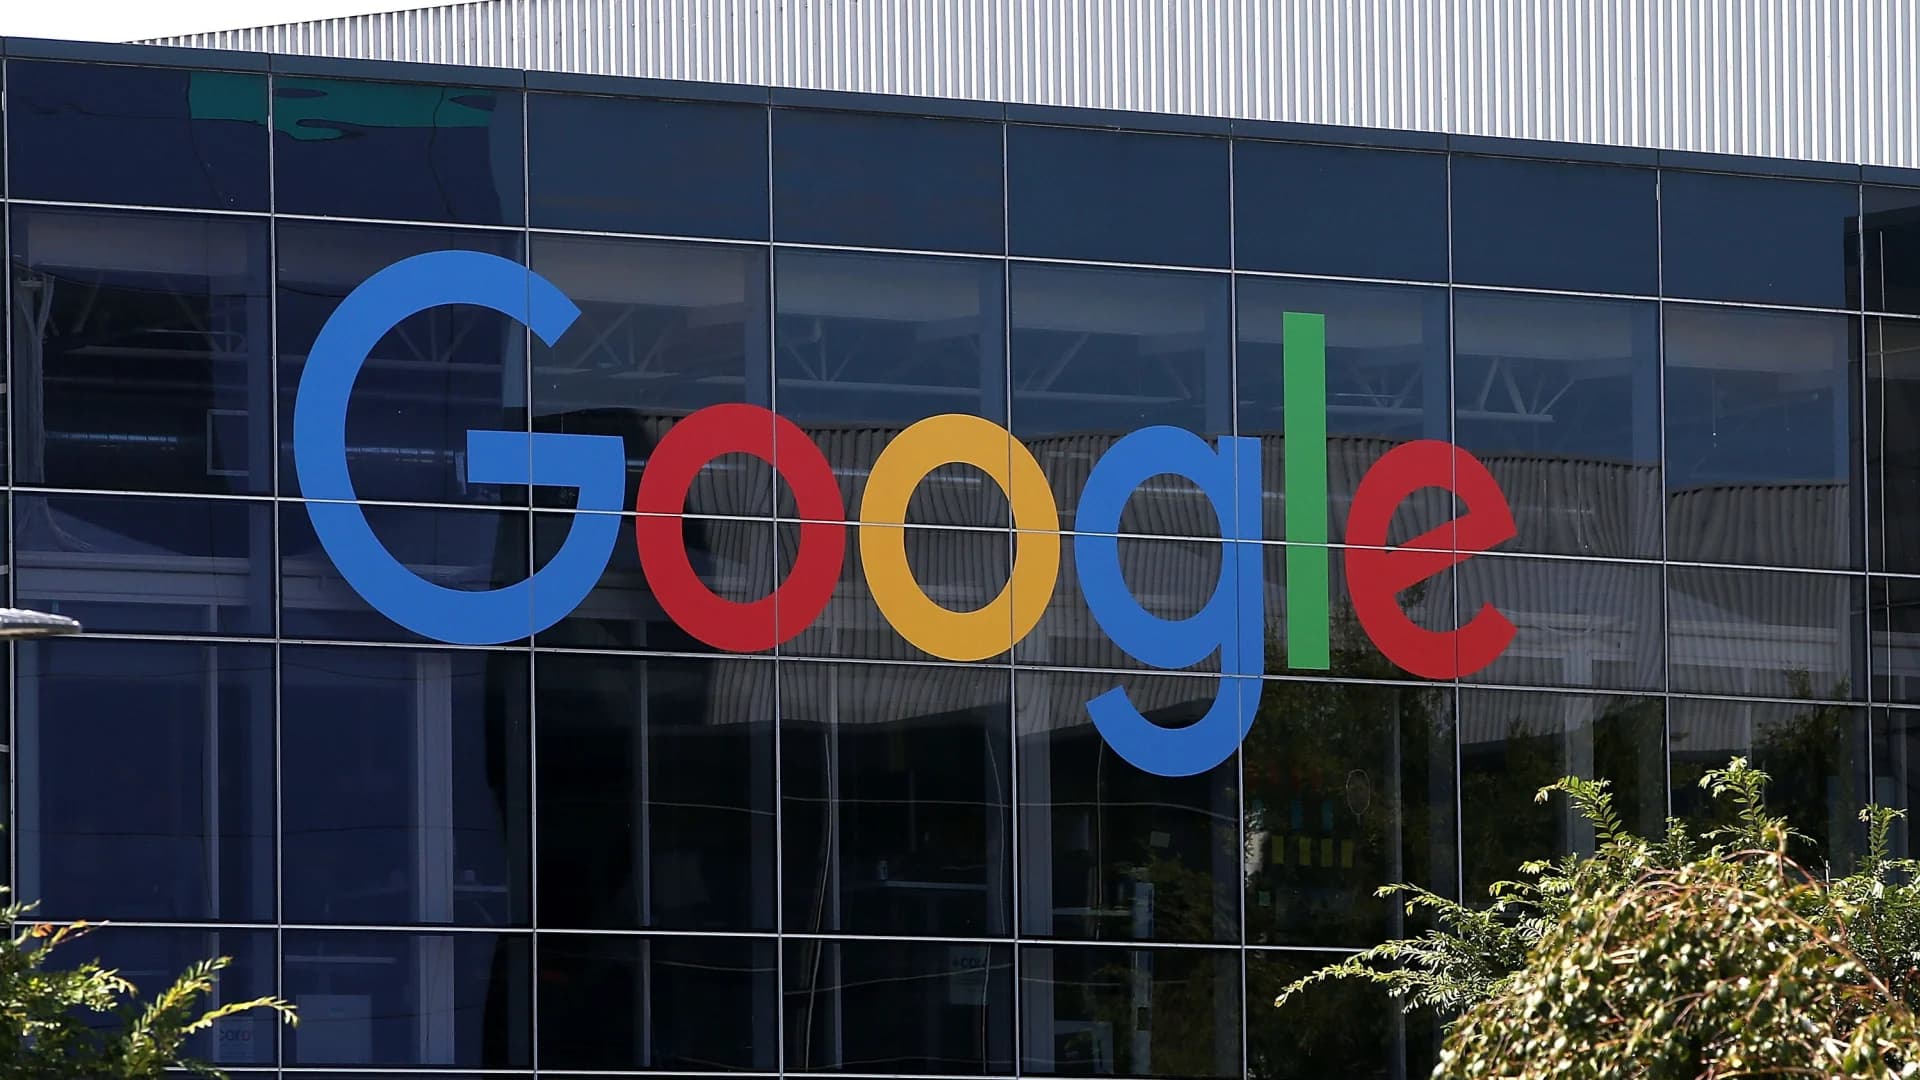 Google commences $1B expansion in New York City